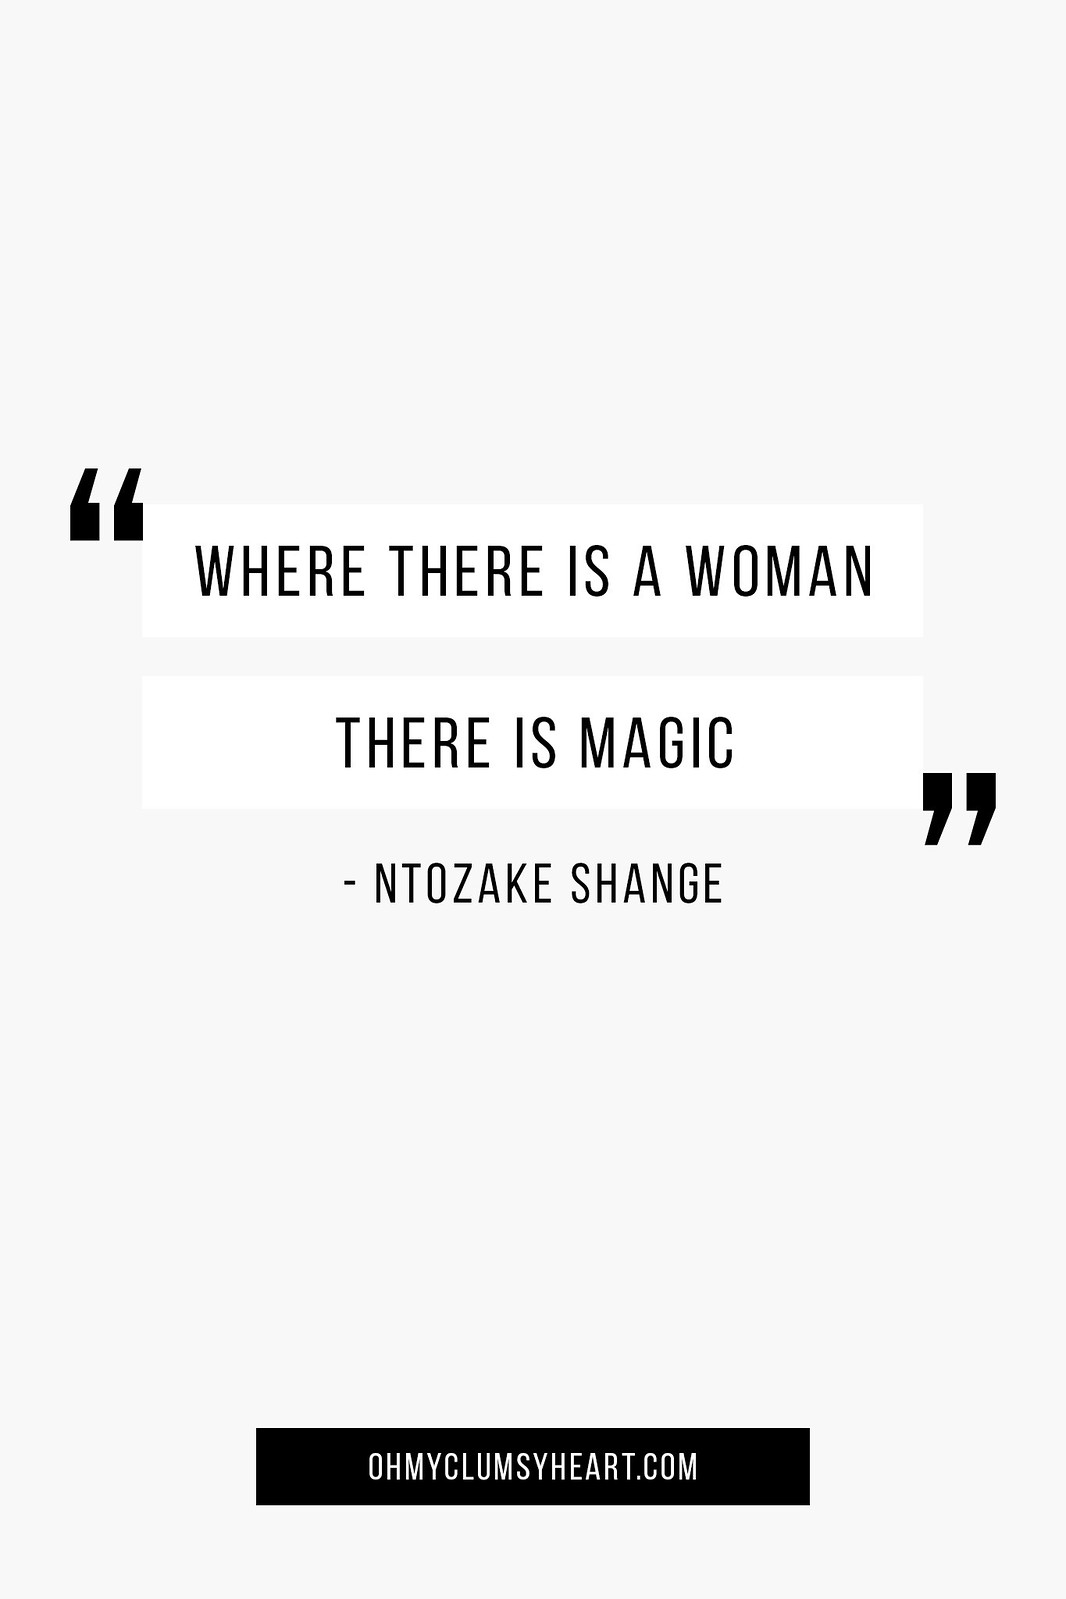 13 Empowering Quotes By 13 Empowering Women